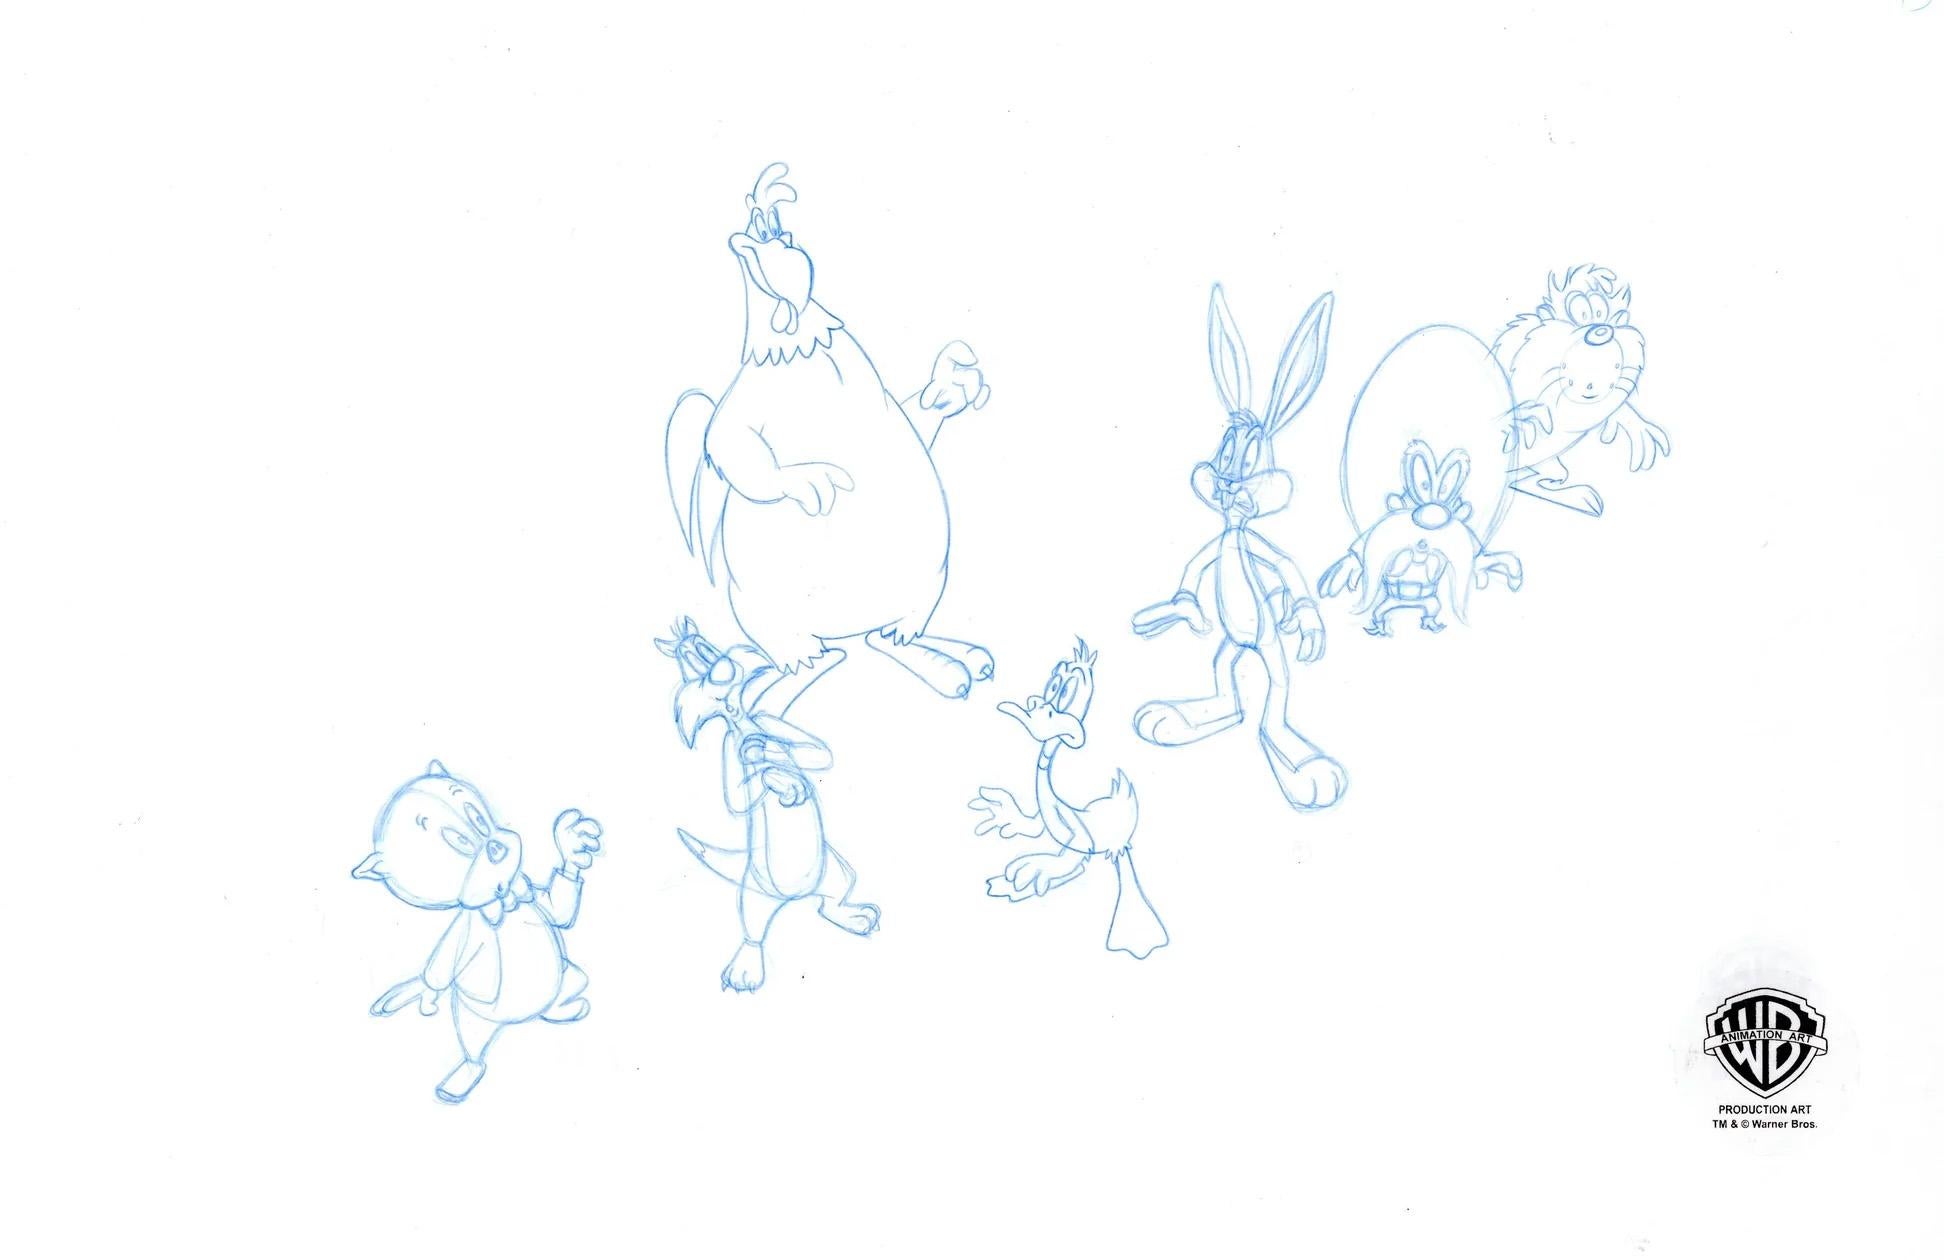 Looney Tunes Original Production Double Sided Drawing: Looney Tunes Cast - Art by Looney Tunes Studio Artists